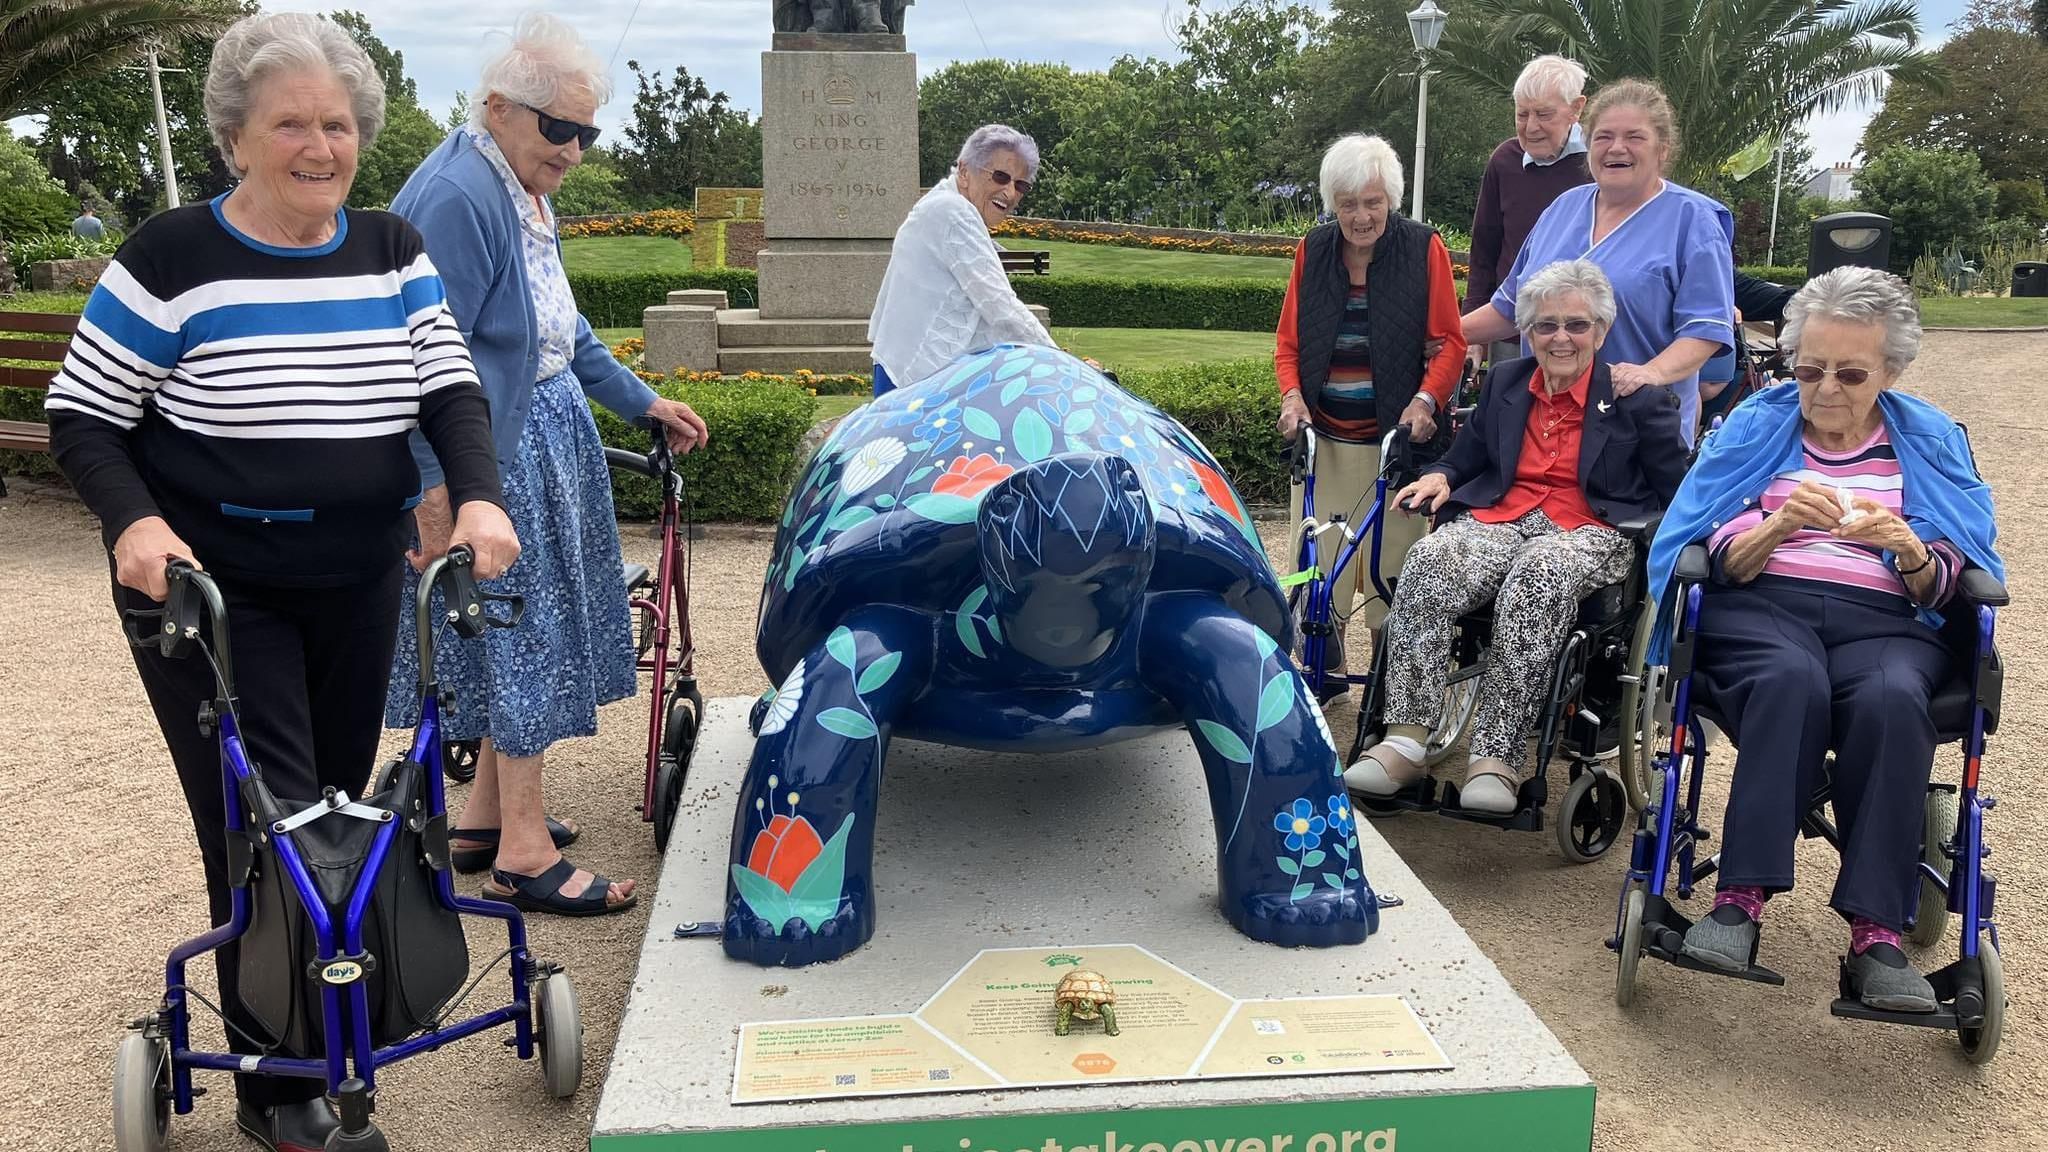 Care home residents standing next to tortoise sculpture